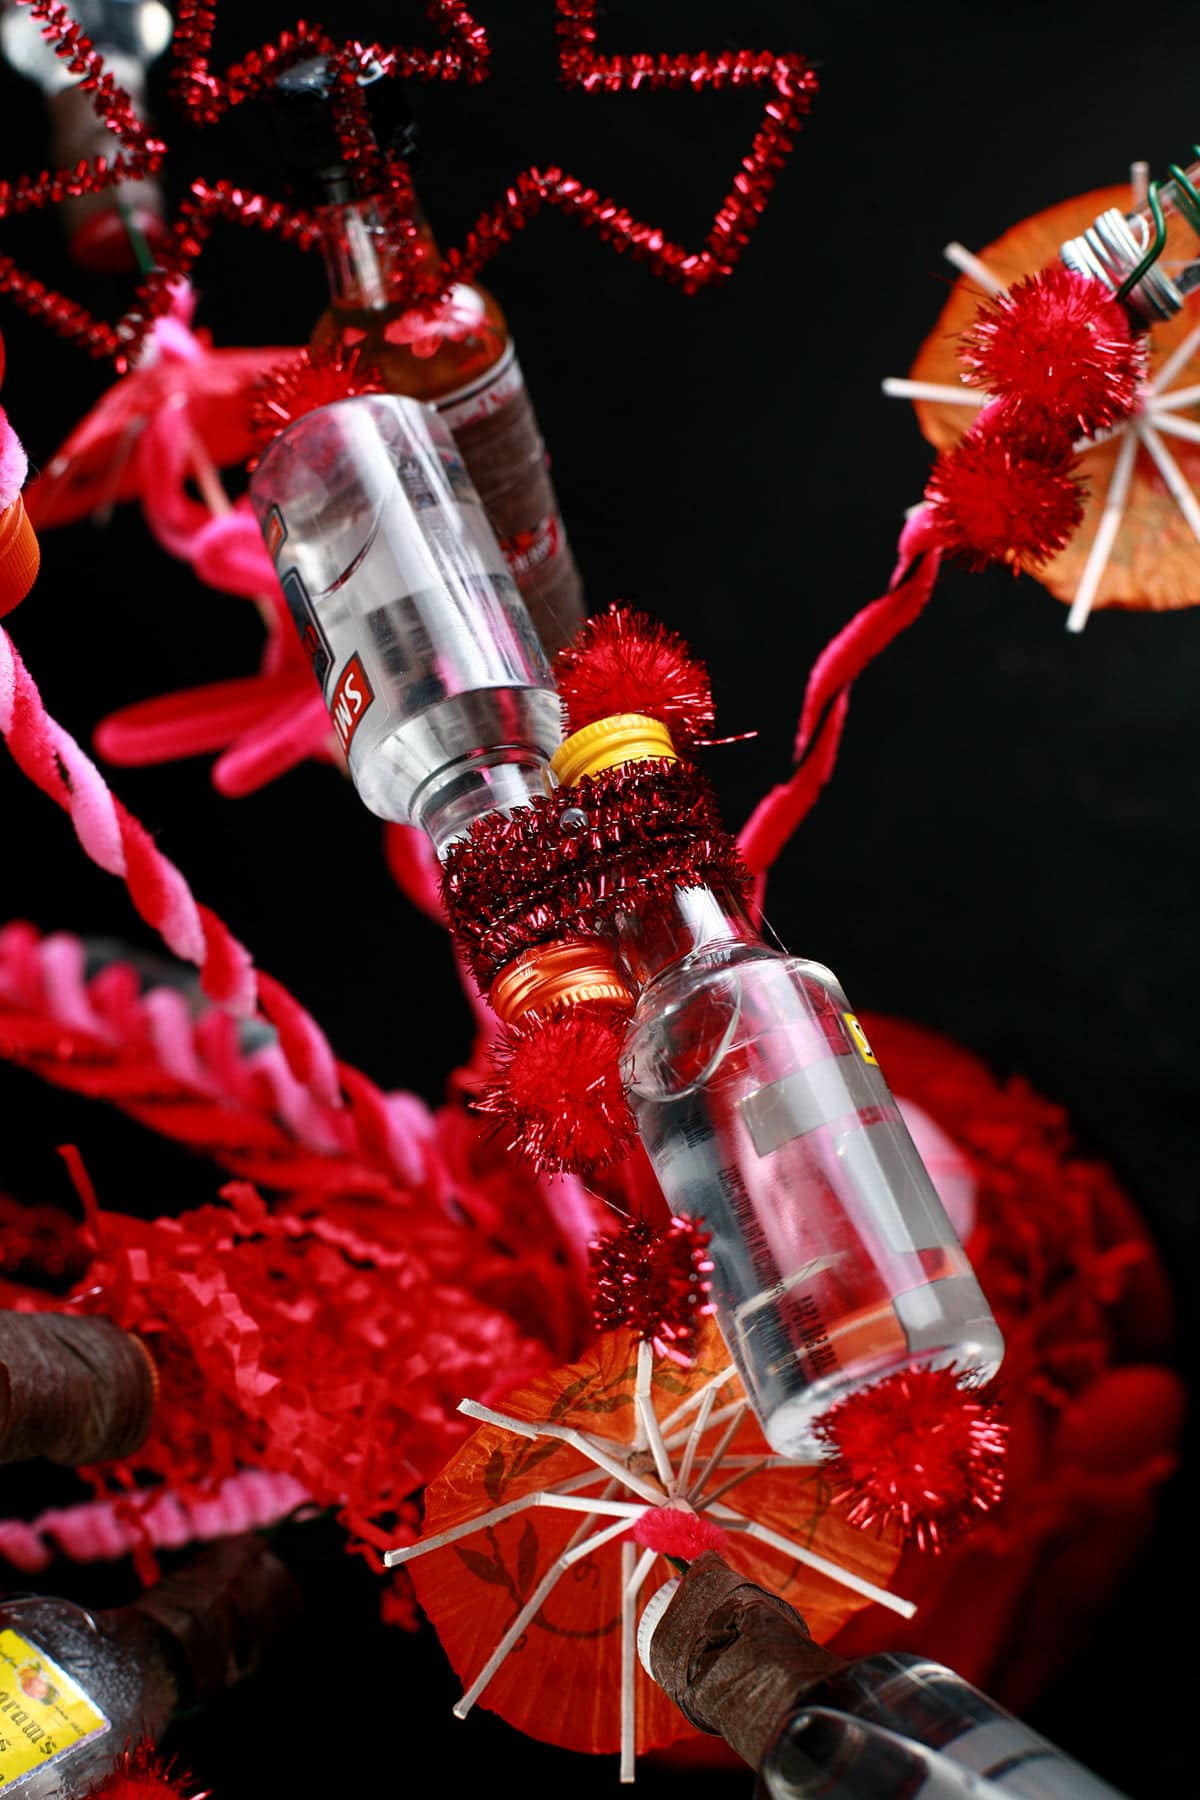 A close up view of a "bouquet" made from mini booze bottles.  Each are wrapped in wire and adored with things like pipe cleaners, mini umbrellas, and pom poms.